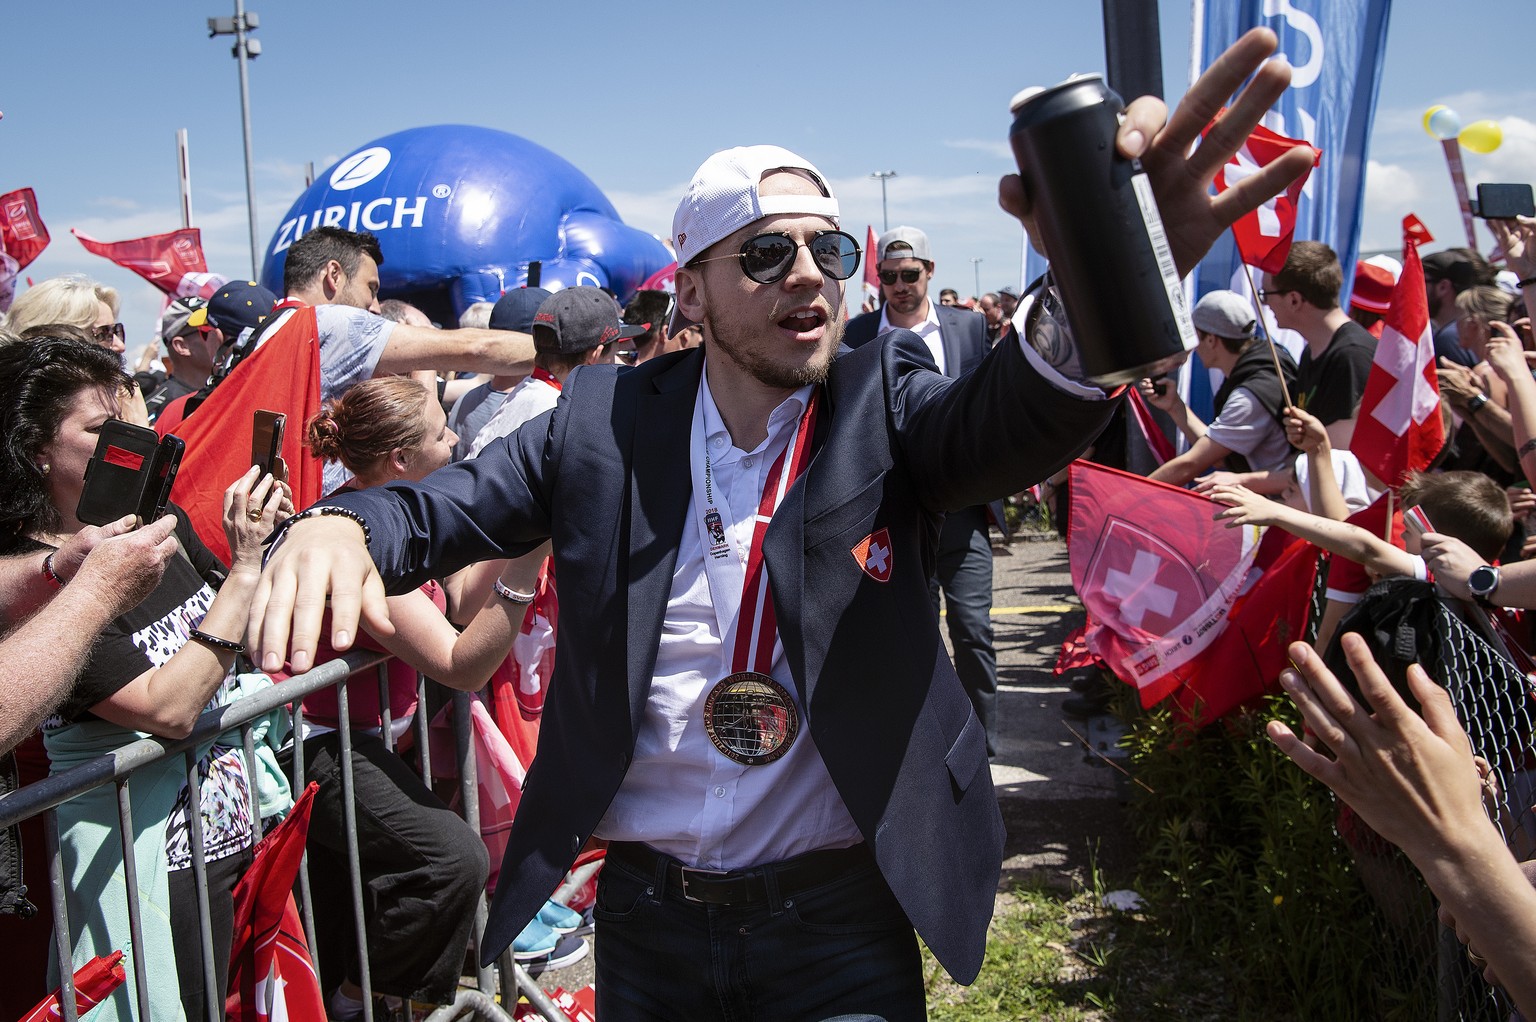 Switzerland’s ice hockey team arrives and is welcomed by fans at Zurich airport in Kloten, Switzerland, Monday, May 21, 2018. Switzerland won the silver medal at the IIHF World Championship in Denmark ...